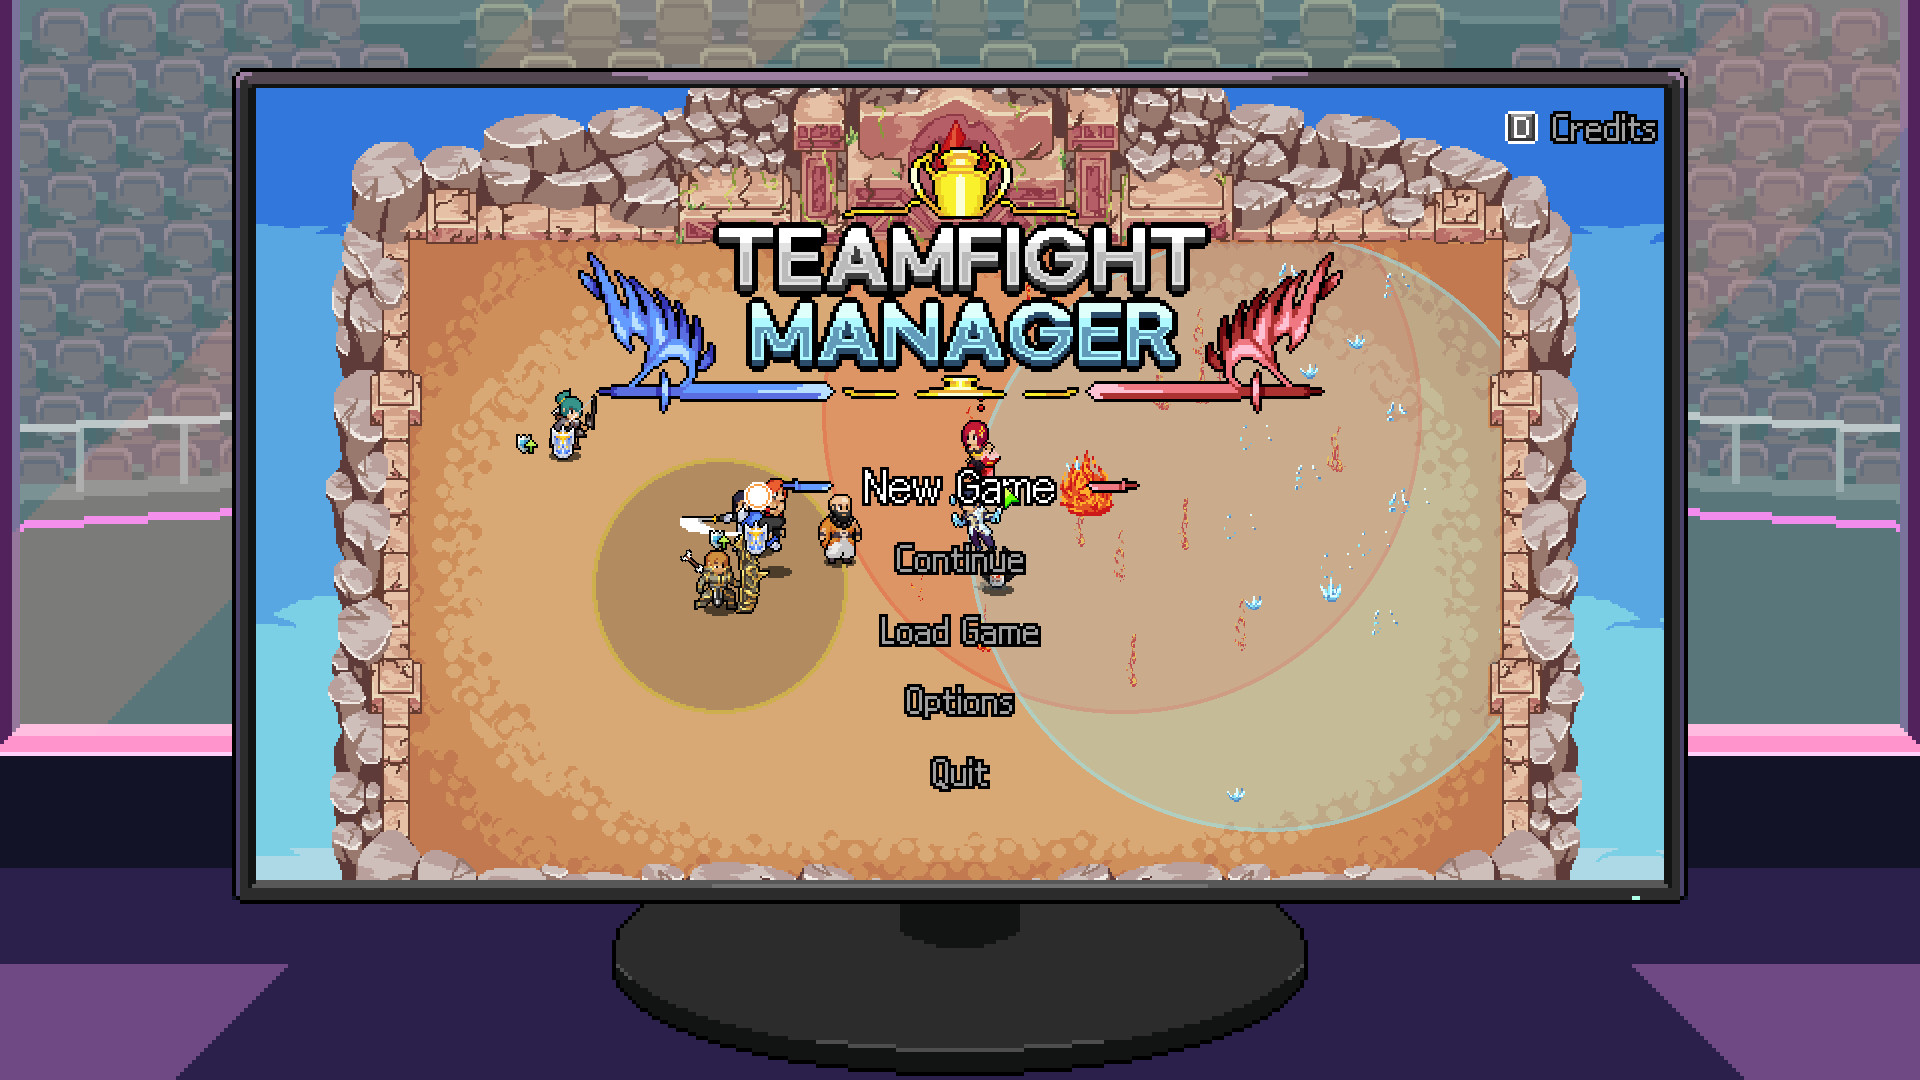 Teamfight manager. Teamfight Manager русификатор. Teamfight Manager freetp. Teamfight Manager комбинации.